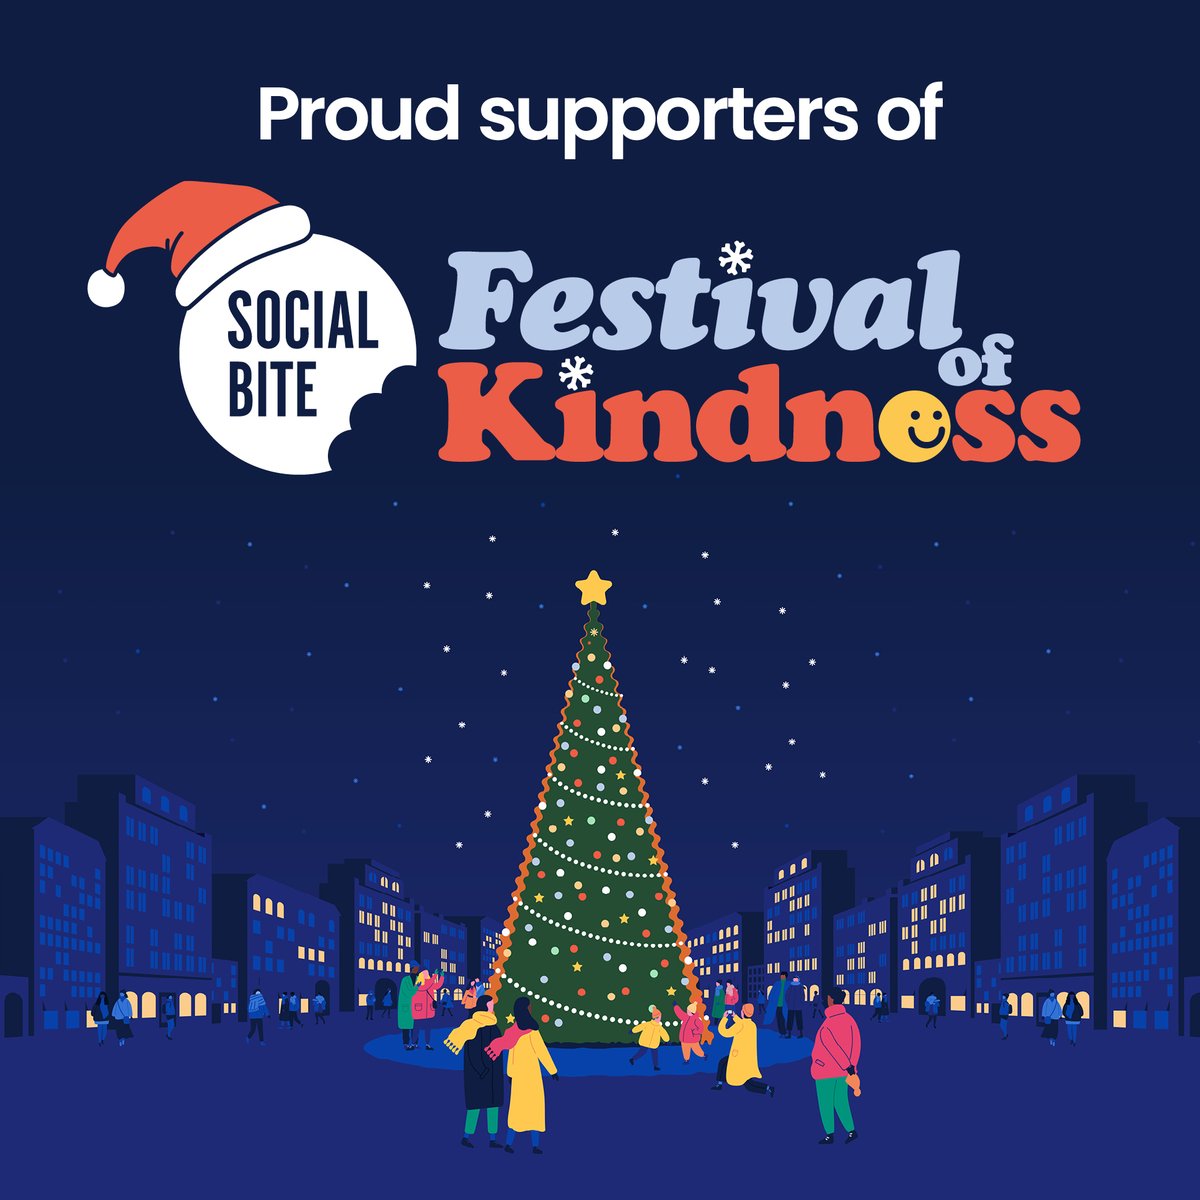 This December, we’re proud to be joining @SocialBite_ on their mission to provide 300,000 meals and gifts to people who are homeless and vulnerable this Christmas. Join the movement of kindness by adding a donation to your bill at our venues. #GivingTuesday #festivalofkindness